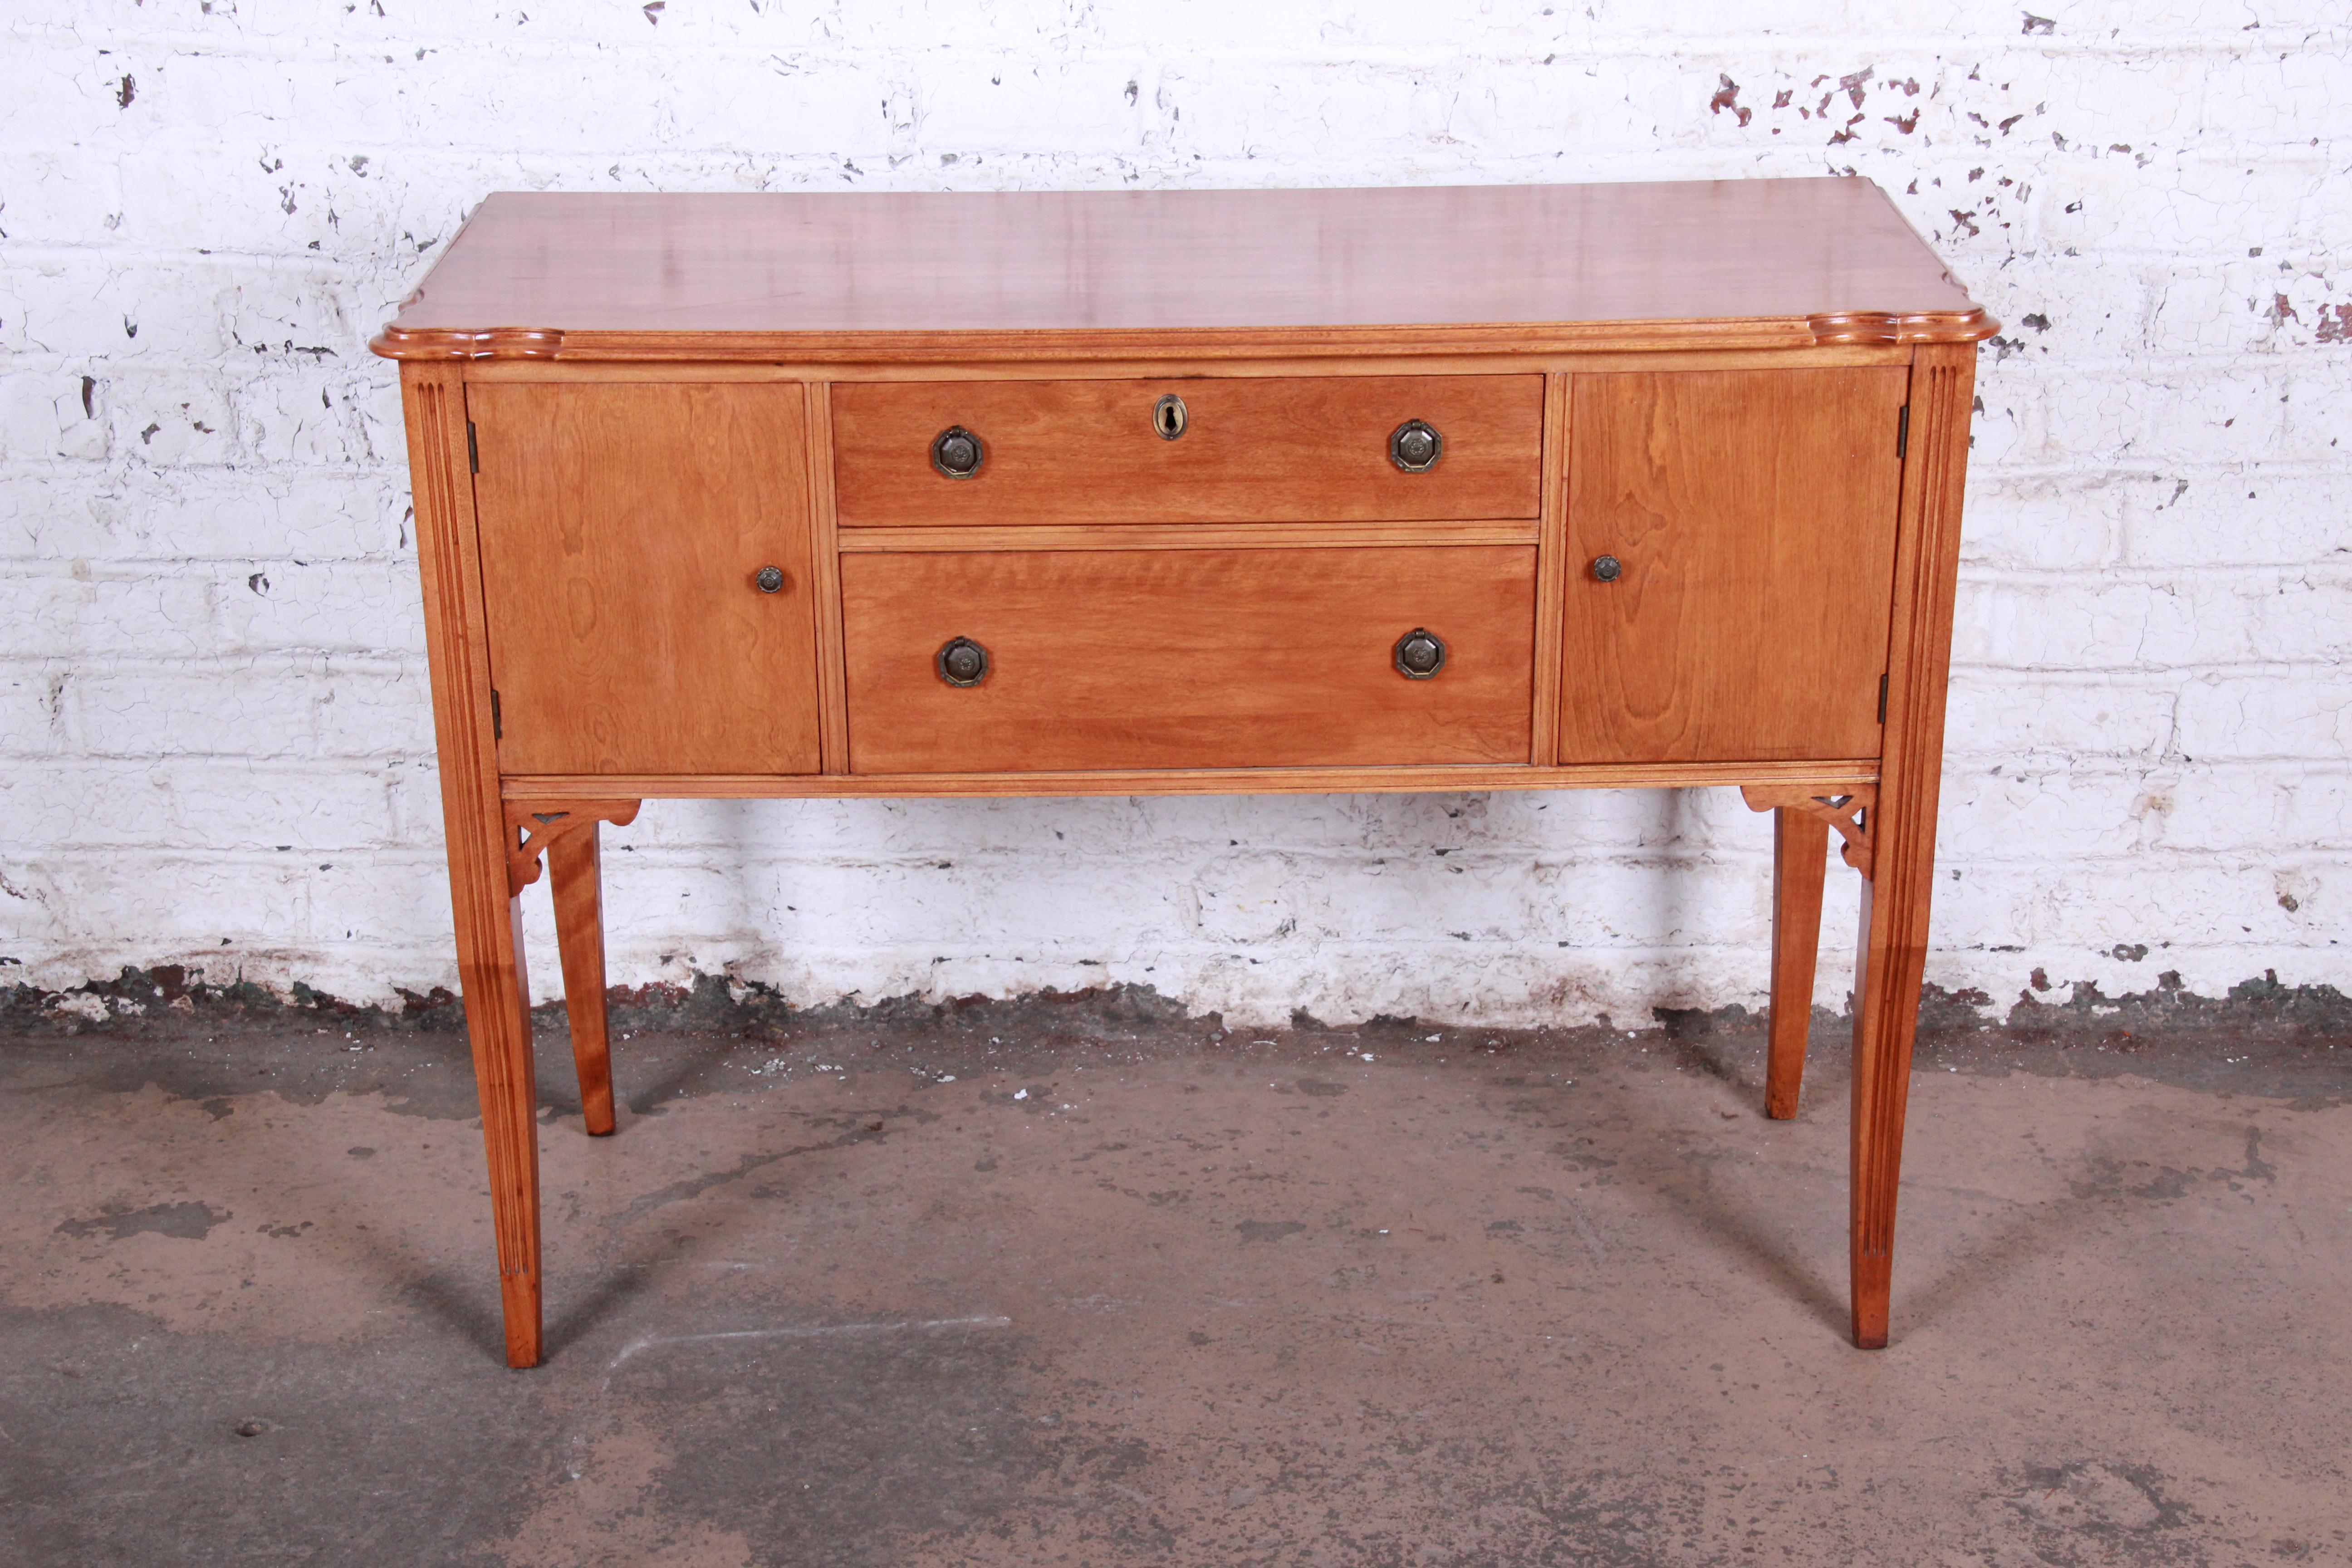 A beautiful antique maple sideboard buffet by S.I. Frank & Son of Chicago. The sideboard features gorgeous wood grain, original brass hardware, and subtle carved wood details. It offers good storage, with two cabinets and two dovetailed drawers. The